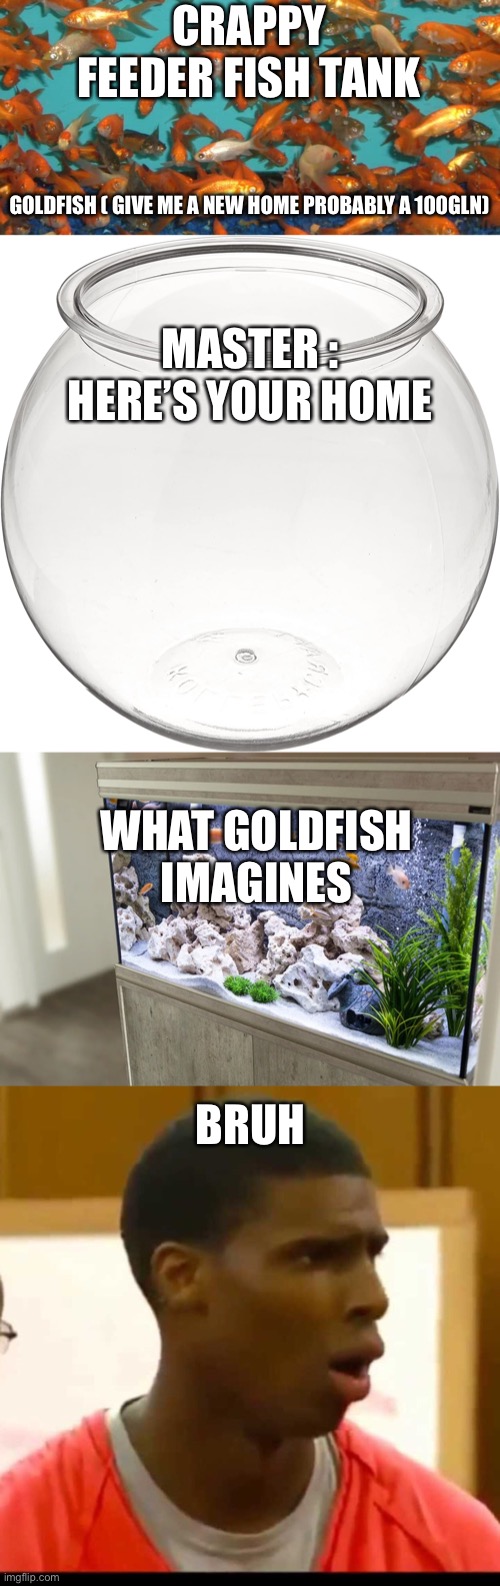 Fish memes | CRAPPY FEEDER FISH TANK; GOLDFISH ( GIVE ME A NEW HOME PROBABLY A 100GLN); MASTER : HERE’S YOUR HOME; WHAT GOLDFISH IMAGINES; BRUH | image tagged in fish memes | made w/ Imgflip meme maker